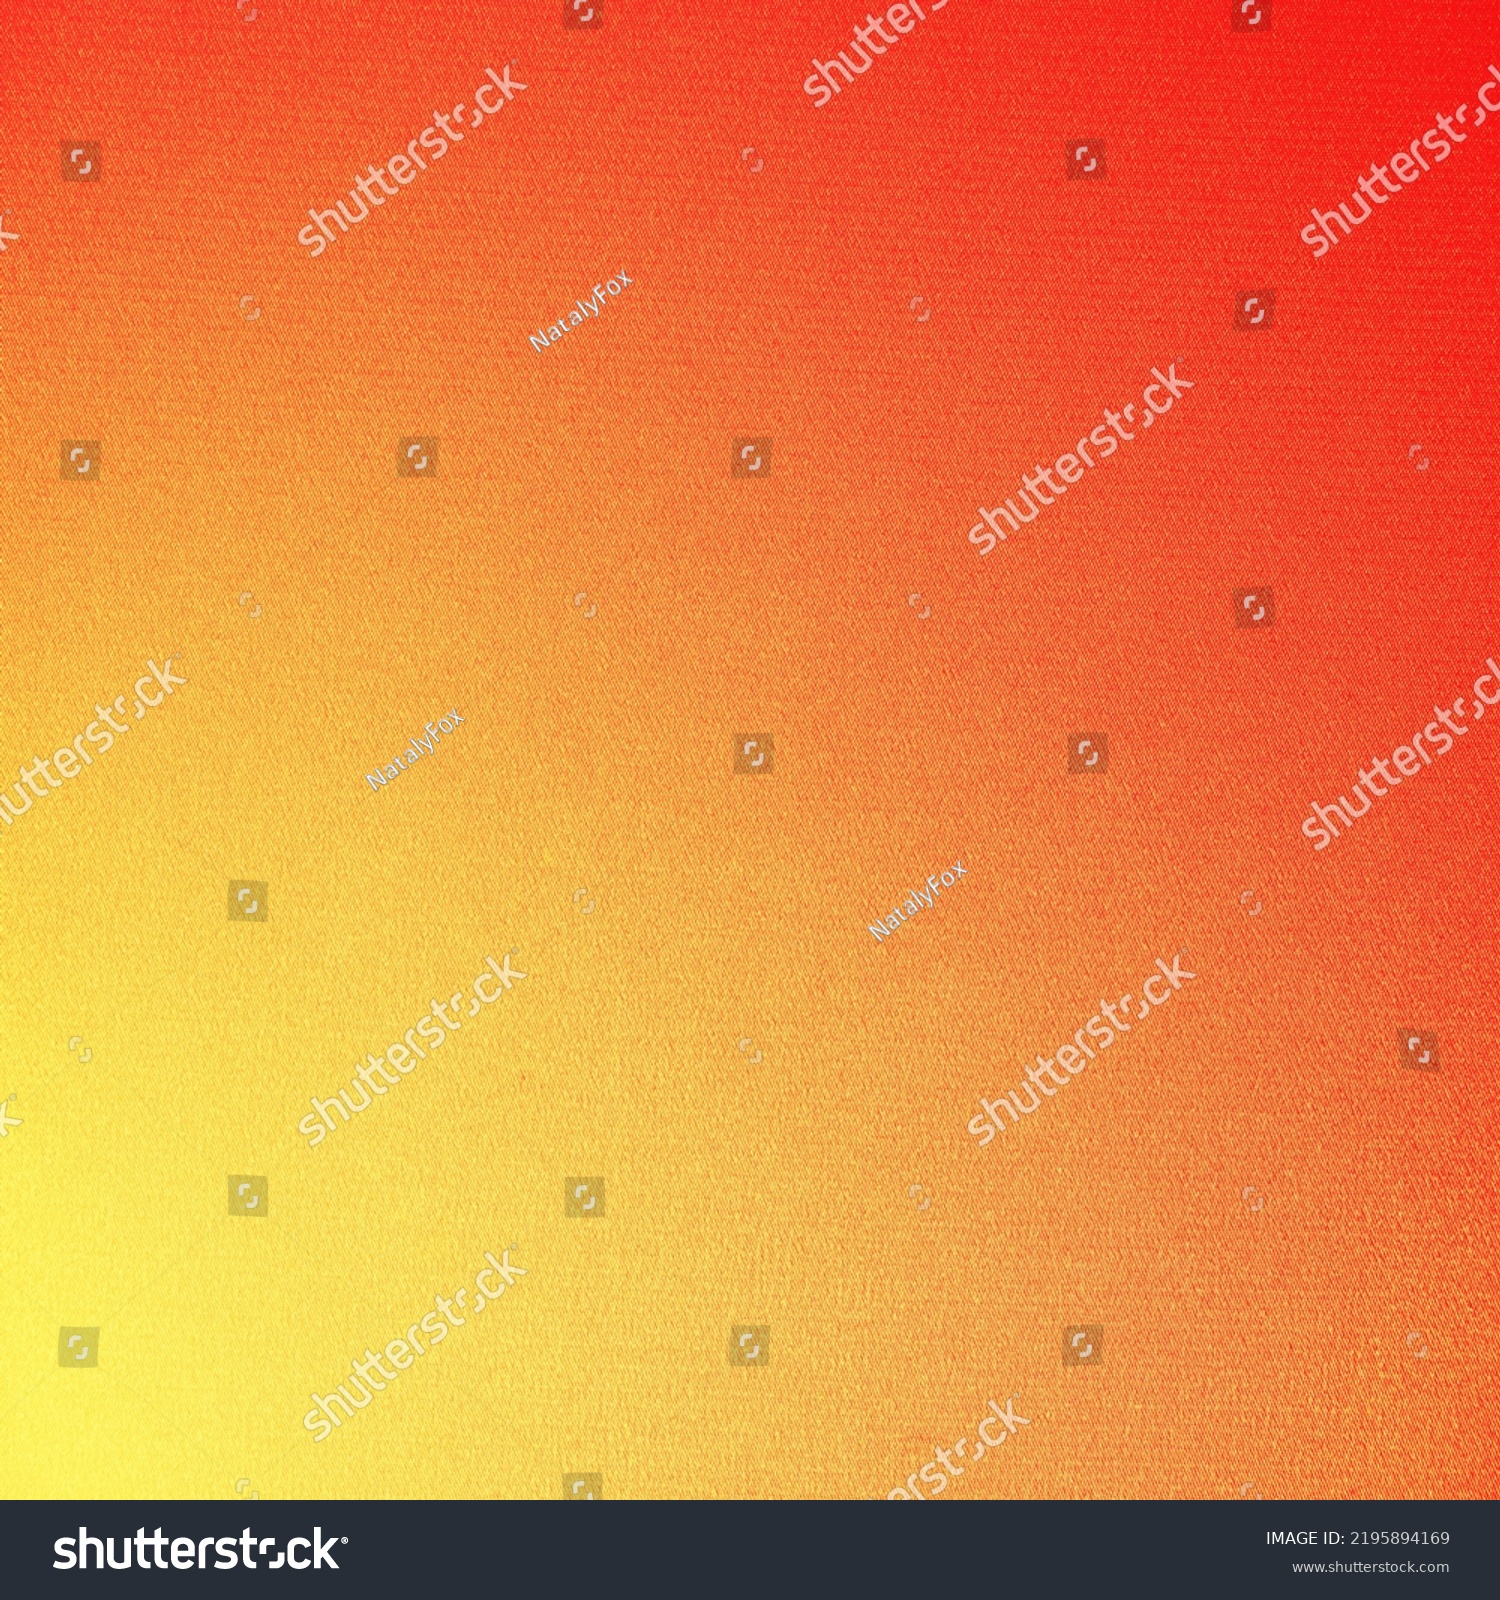 Golden yellow orange red abstract background. Color gradient. Bright fiery background. Space for design. Poster. Mother's Day, Valentine, September 1, Halloween, autumn, thanksgiving. Hot sale. Empty. #2195894169